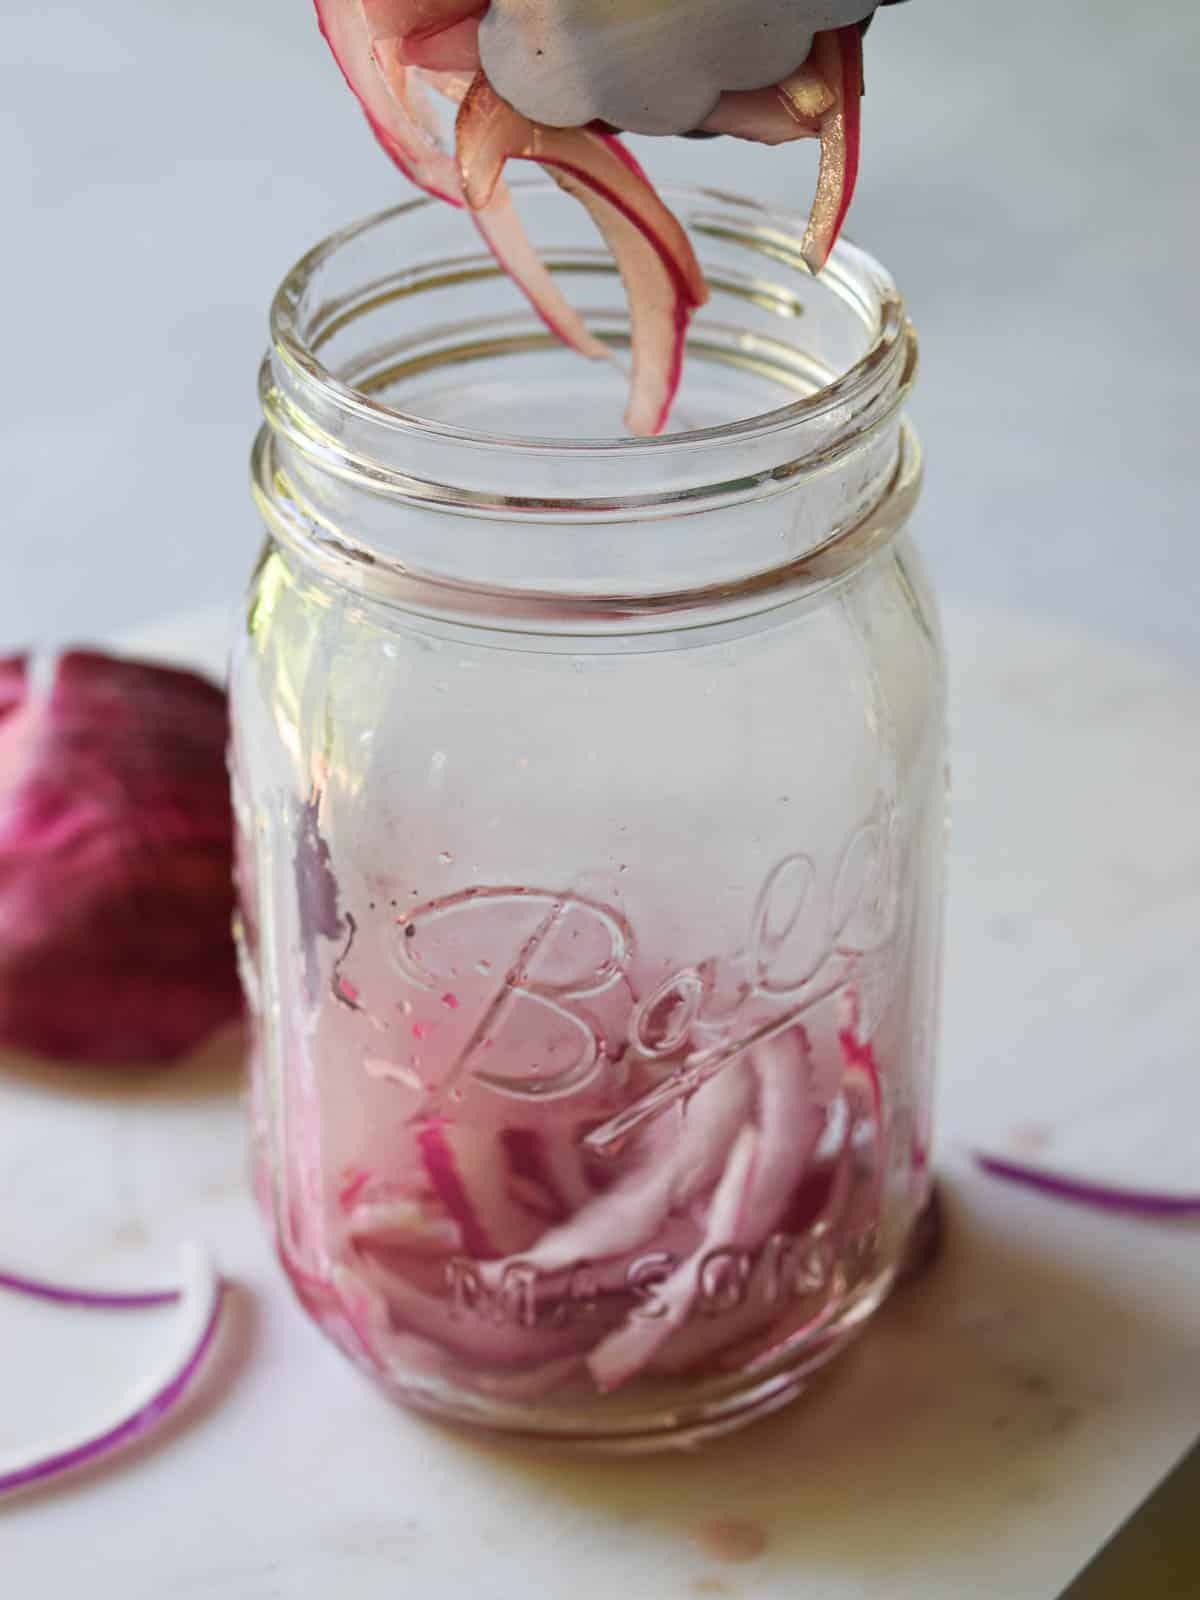 Red-onions are added to a mason jar.